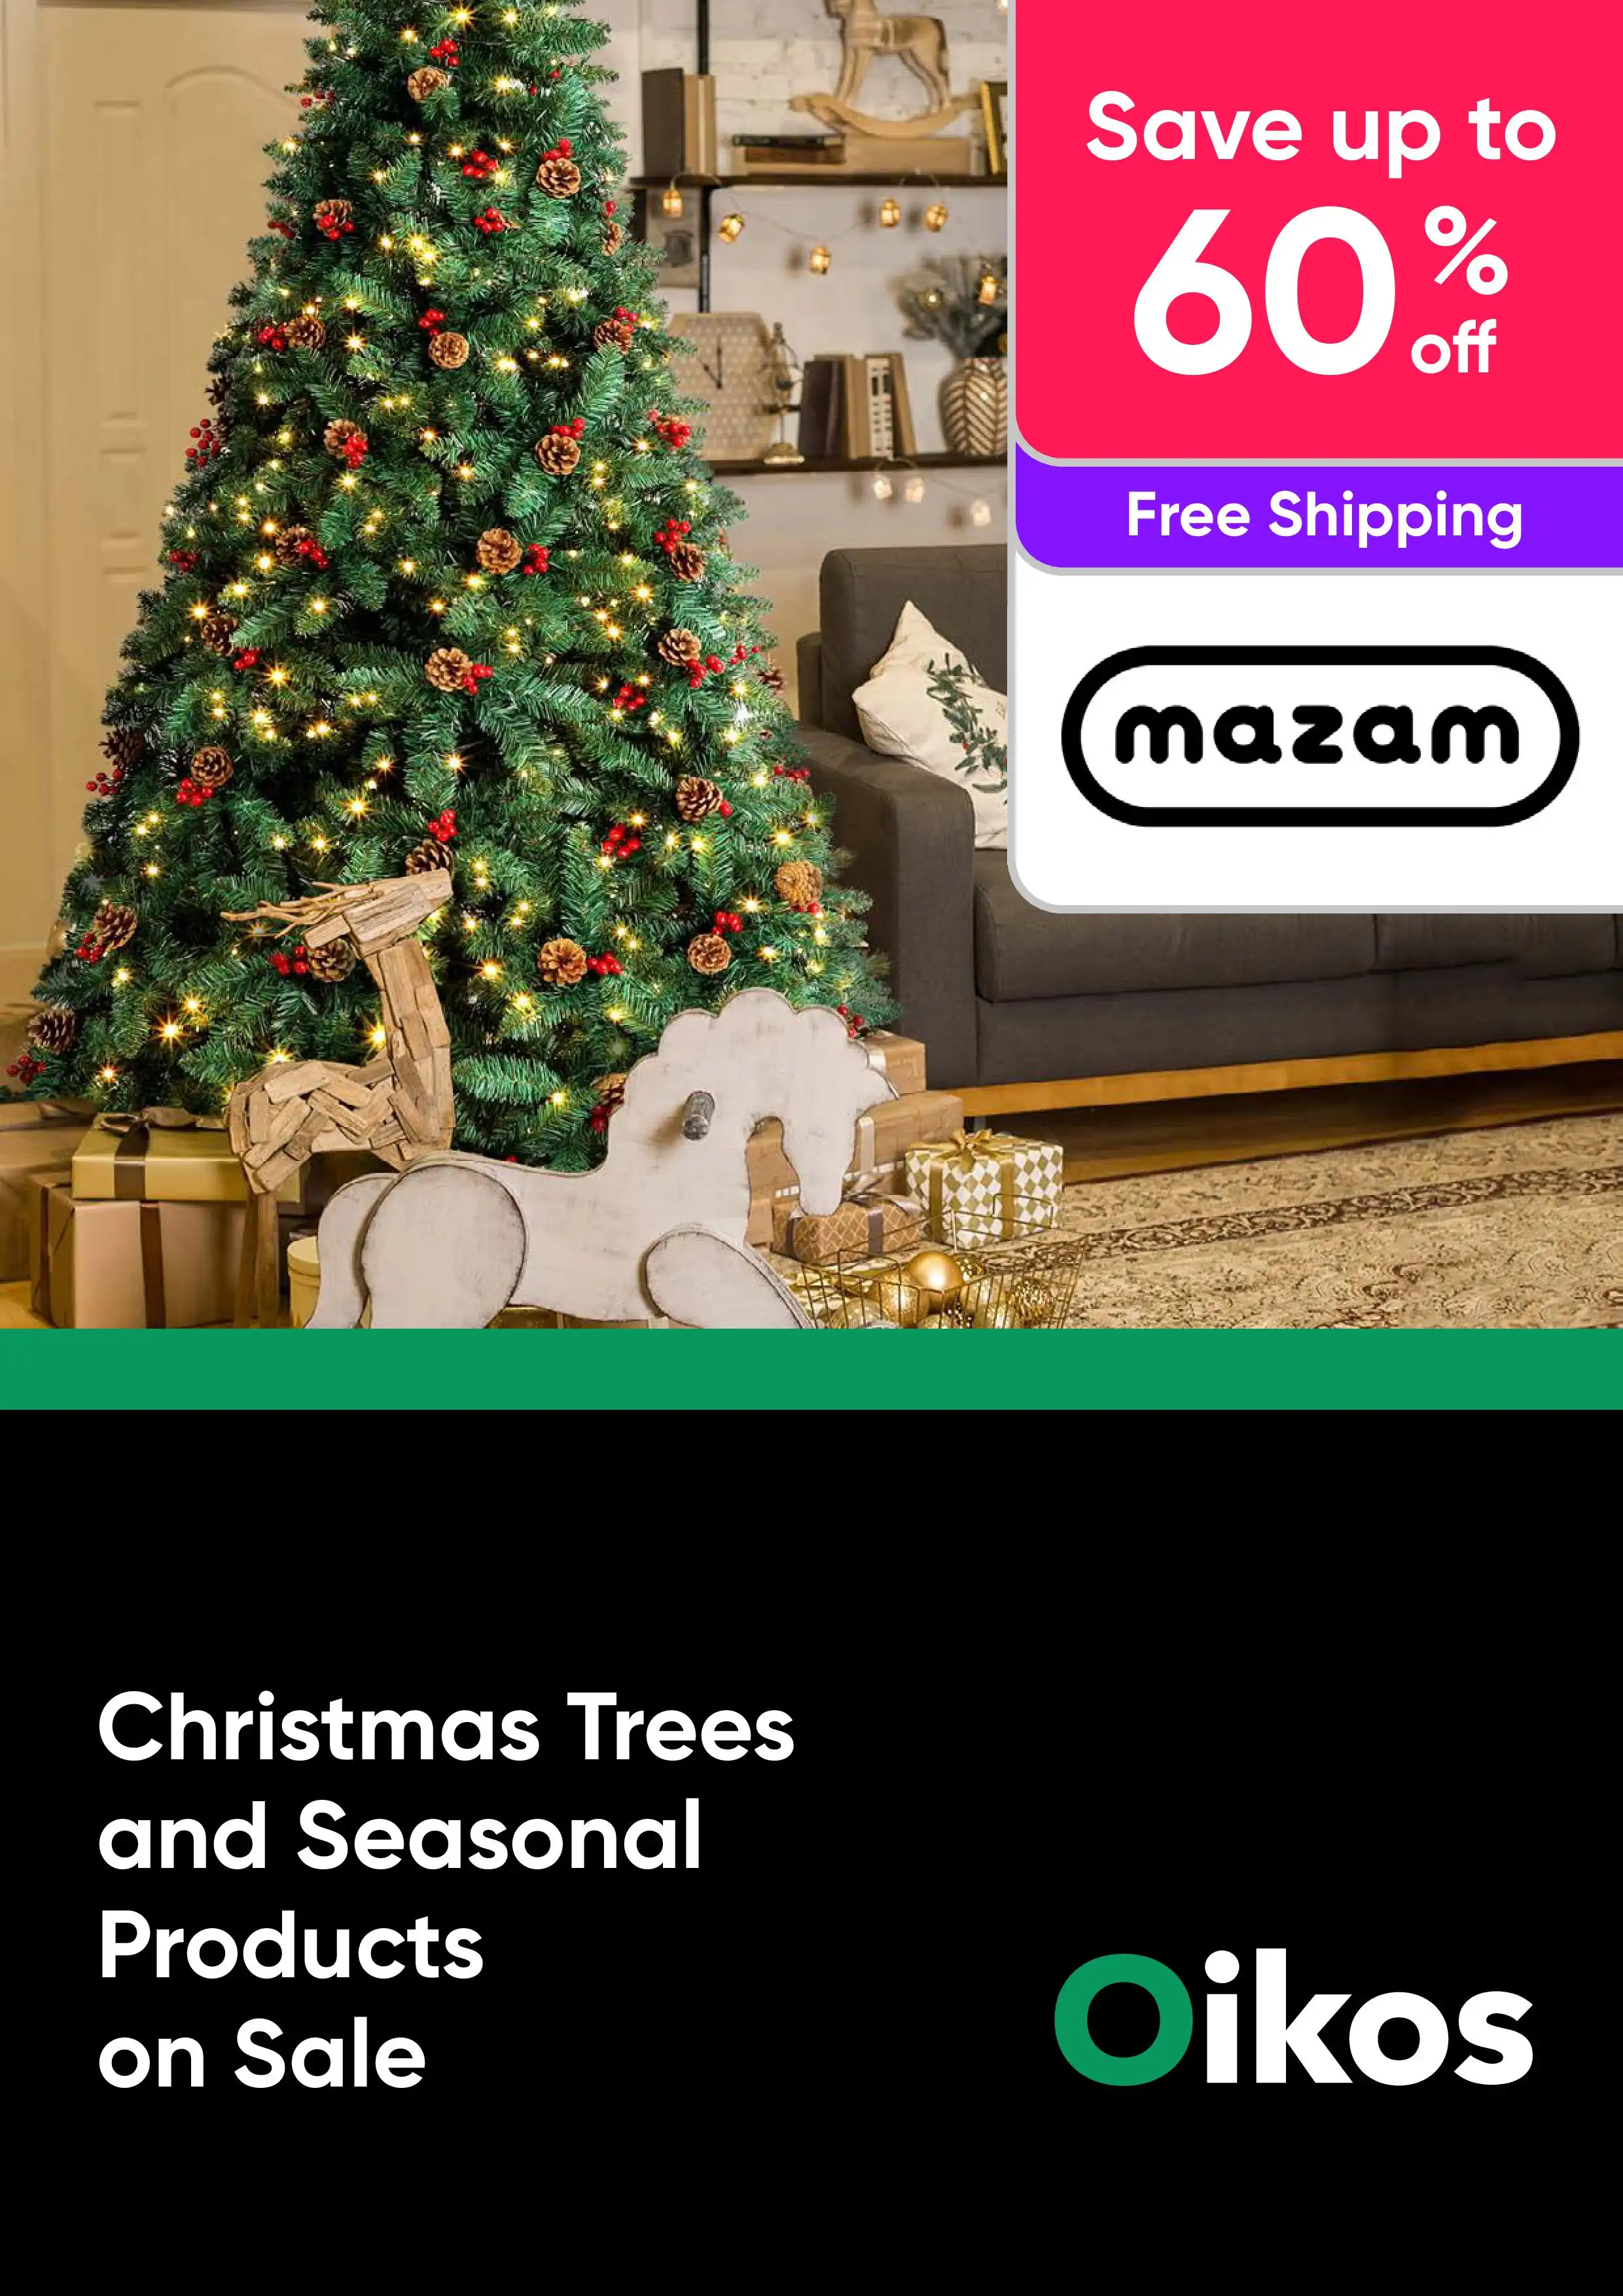 Christmas Trees and Seasonal Products Specials - Save Up to 60% Off RRP